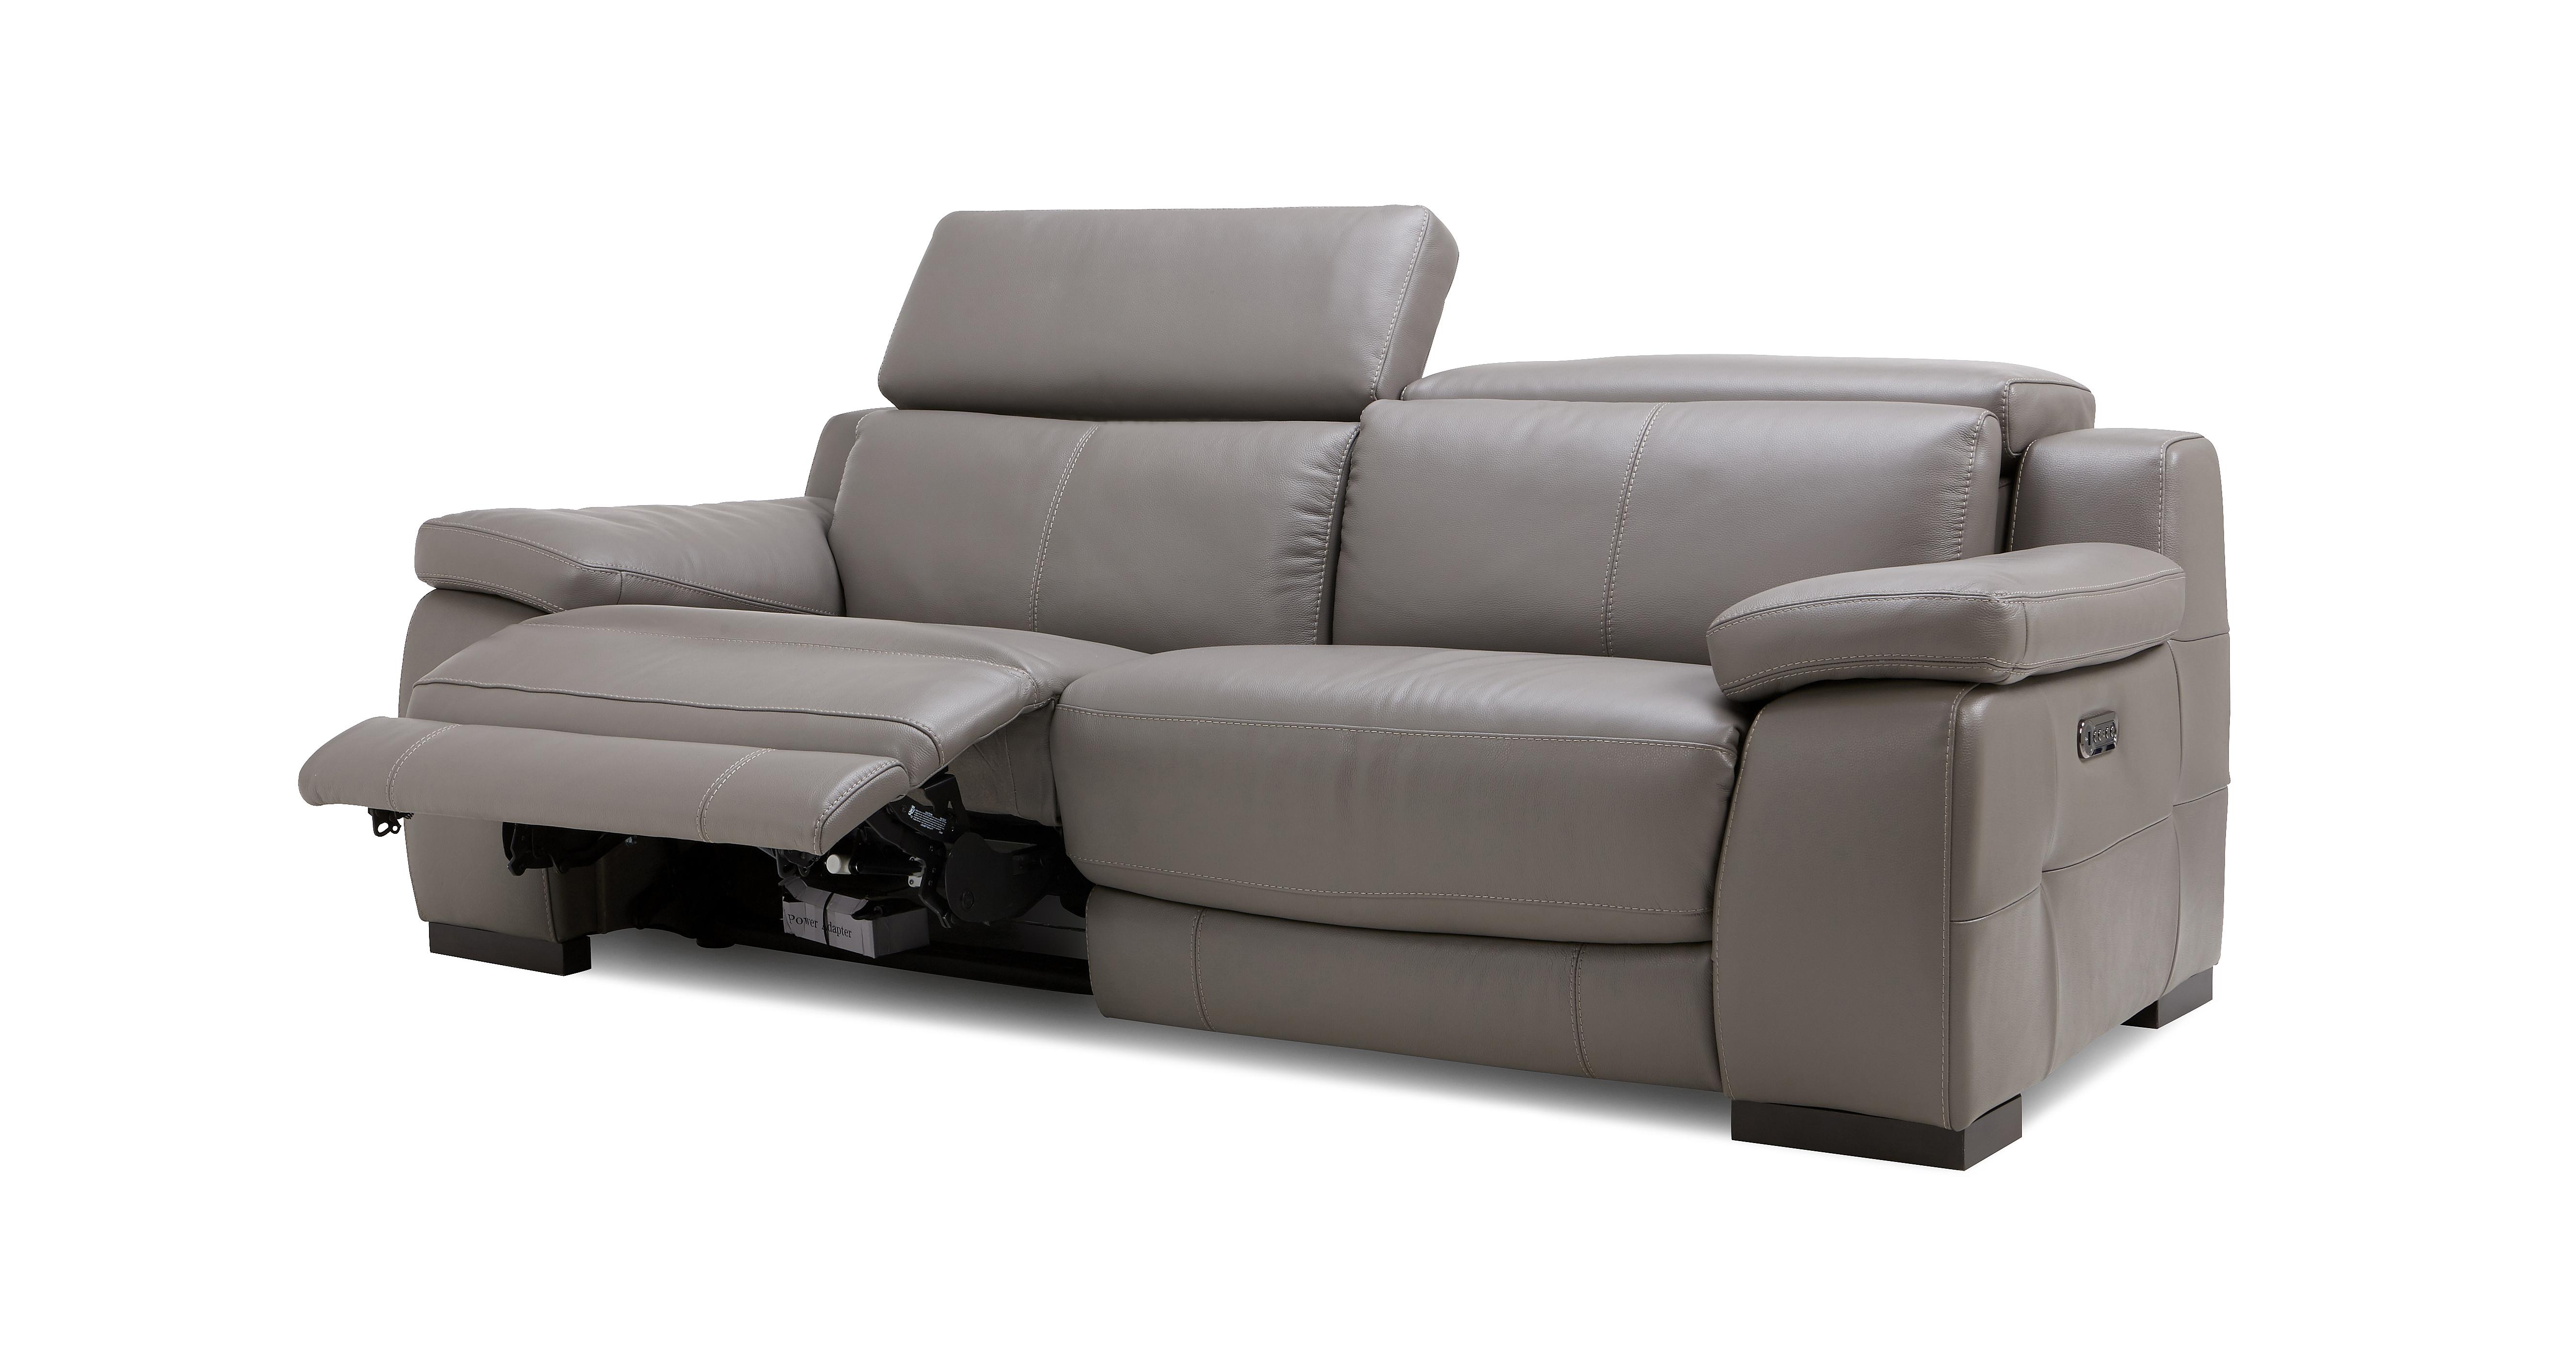 Riposo 3 Seater Electric Recliner New Club | DFS Ireland